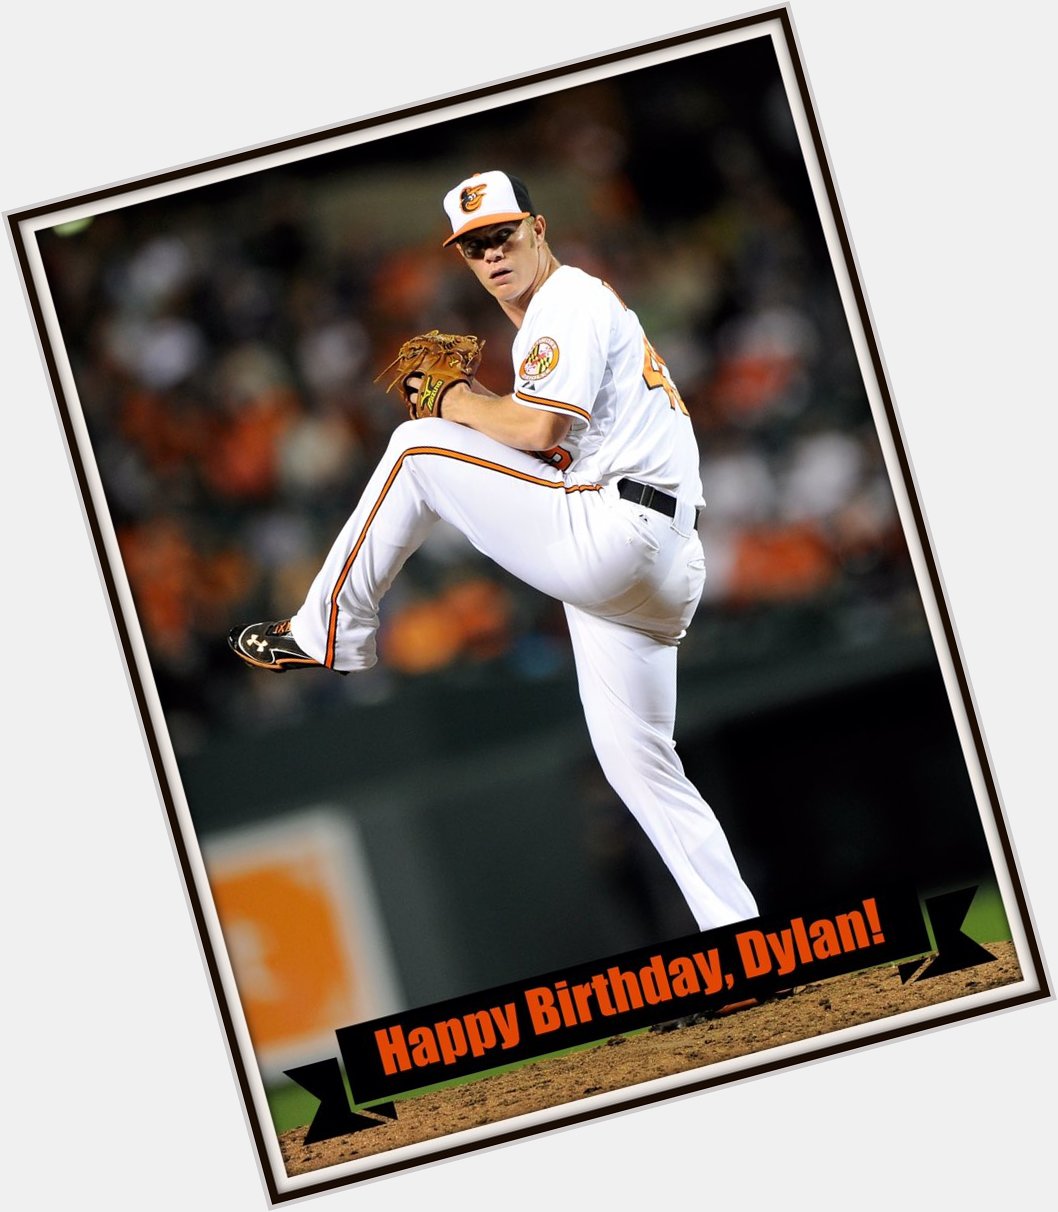 Happy 23rd Birthday to Dylan Bundy! to wish him a good one. 